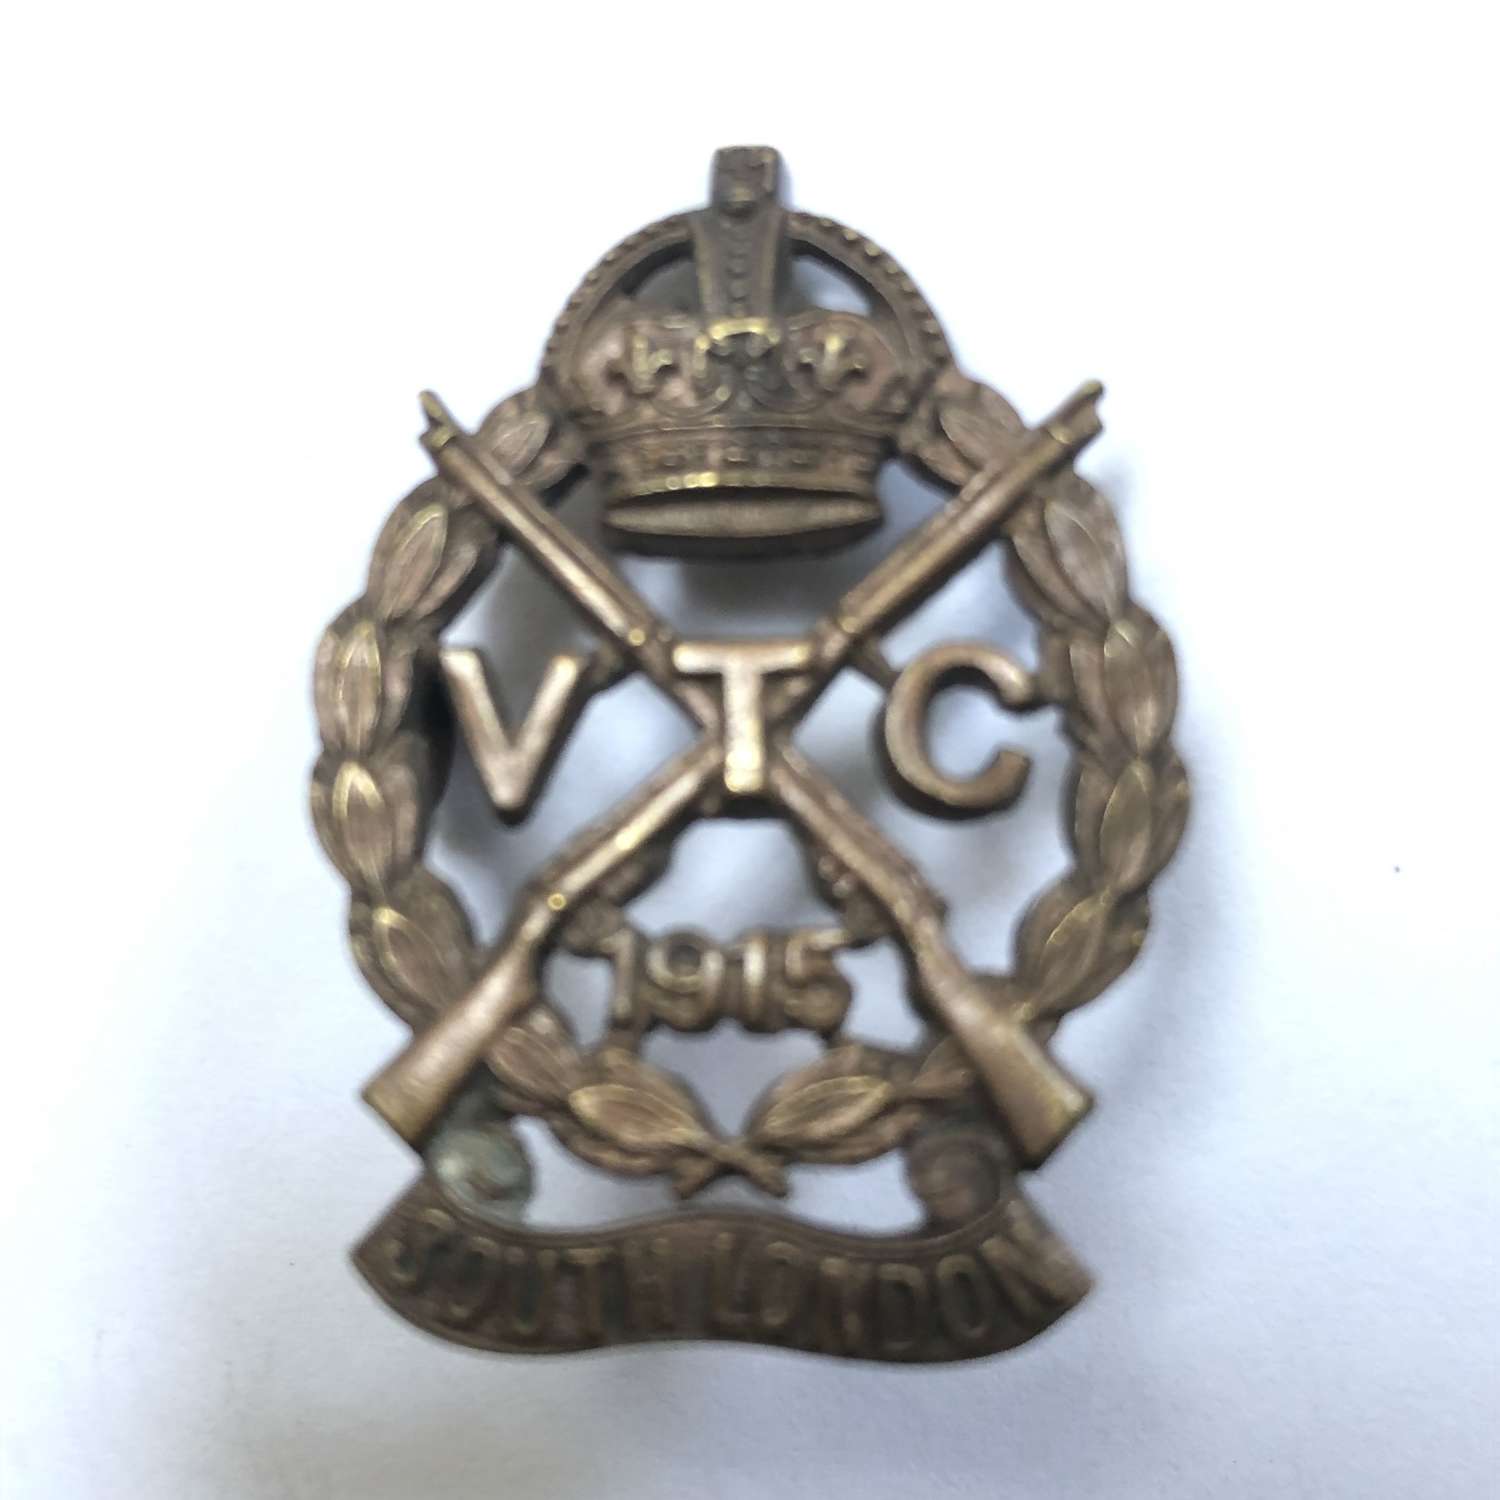 South London Volunteer Training Corps 1915 VTC cap badge by Gaunt